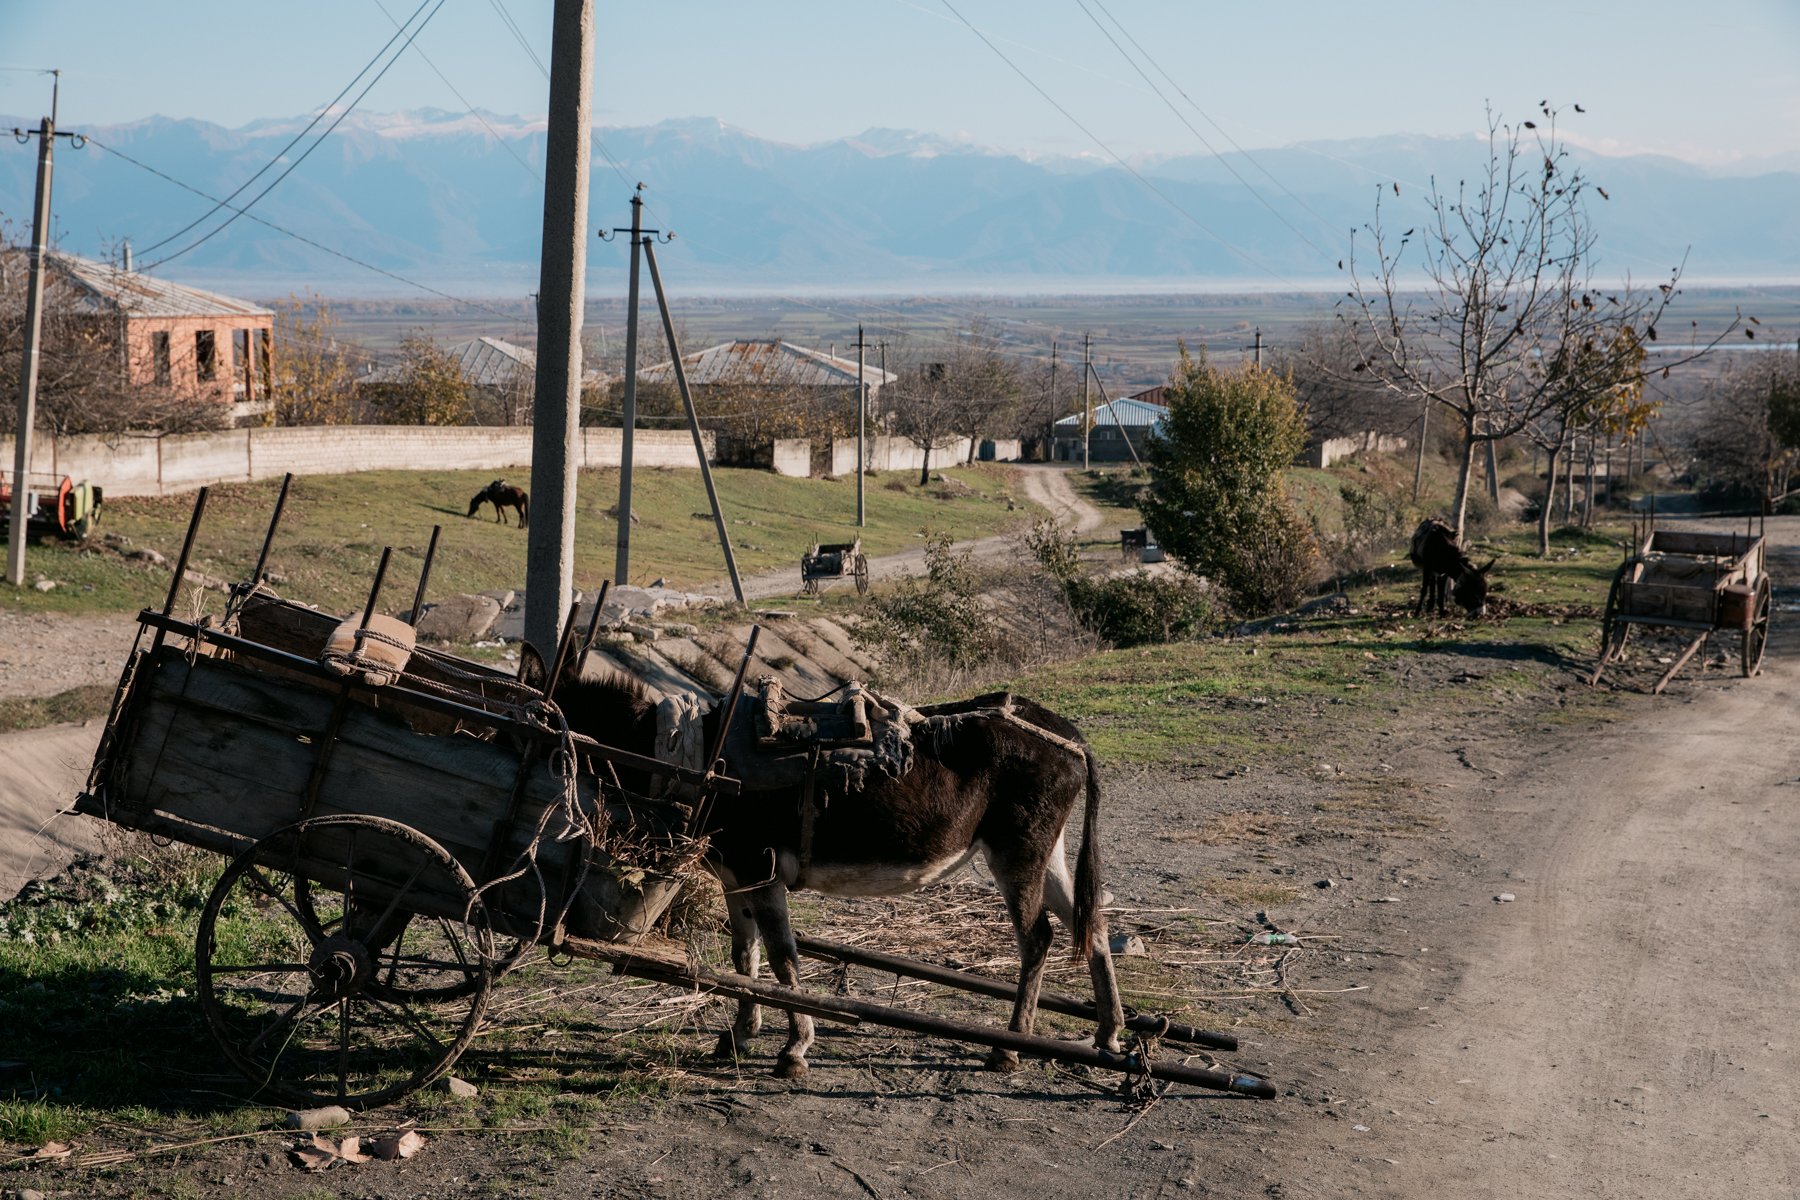  Two donkeys and a horse wait for their owners to return from Bodbiskhevi market. 